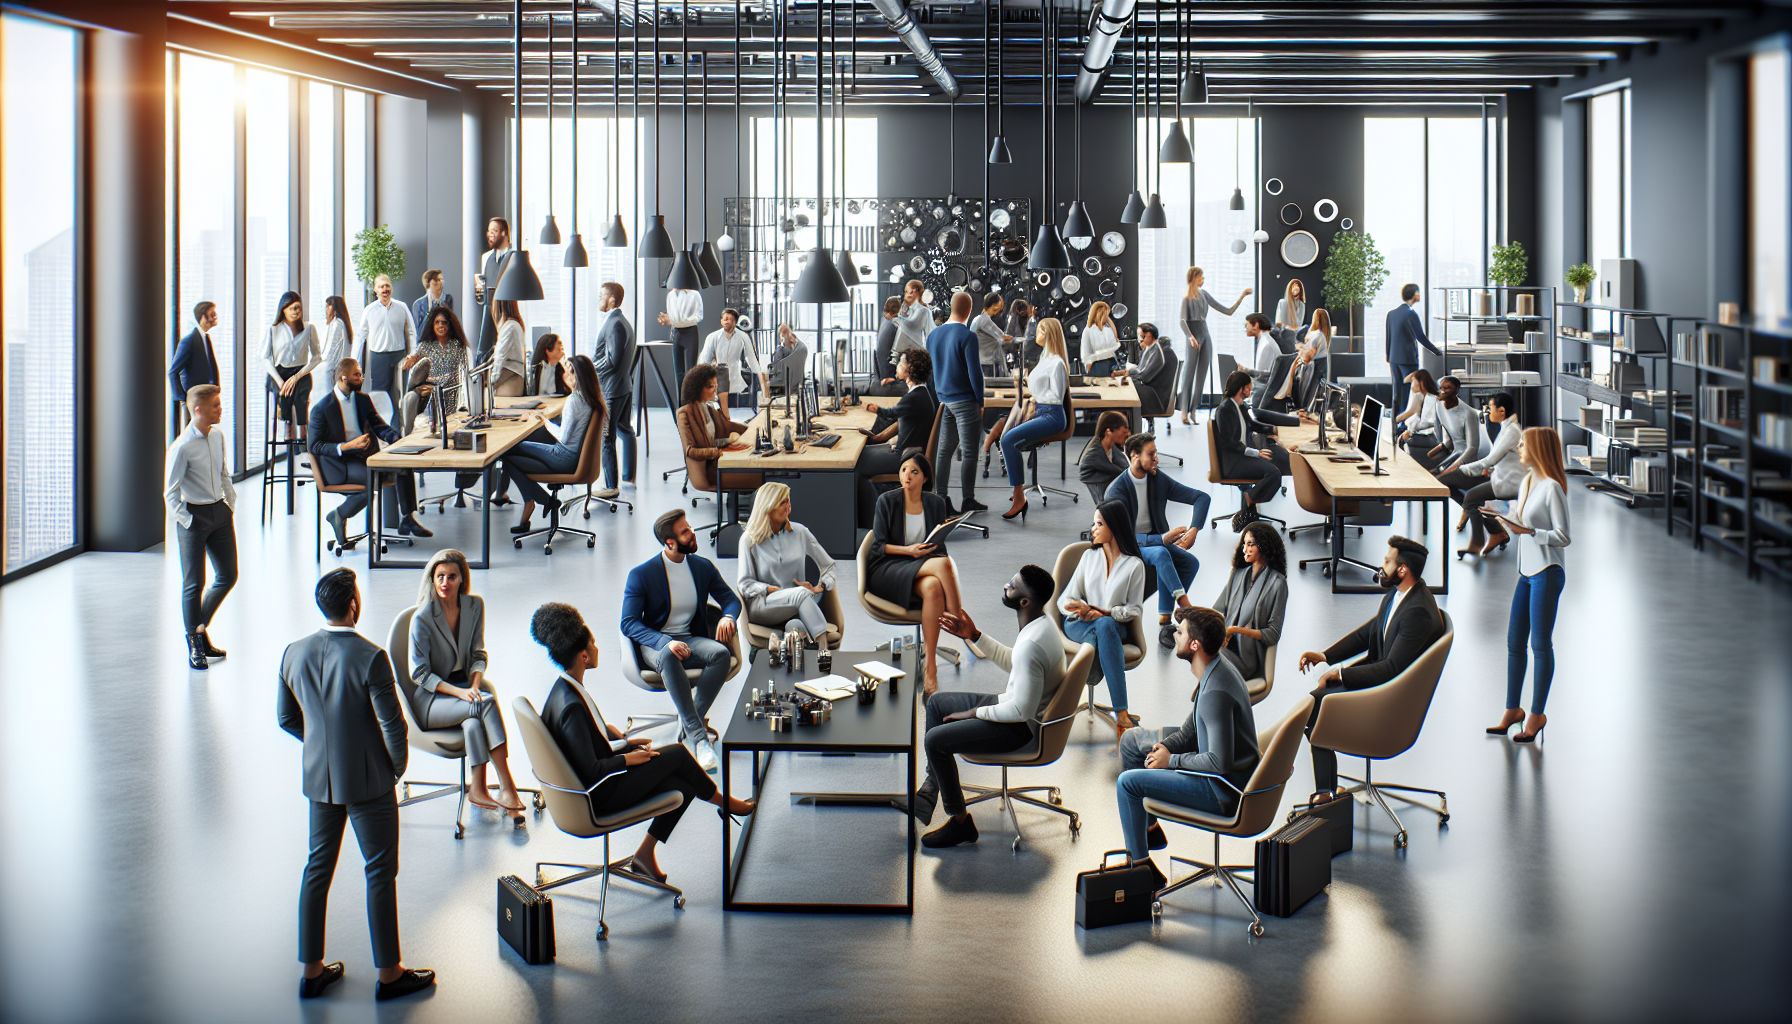 Valve's innovative work environment with employees collaborating in a modern office space